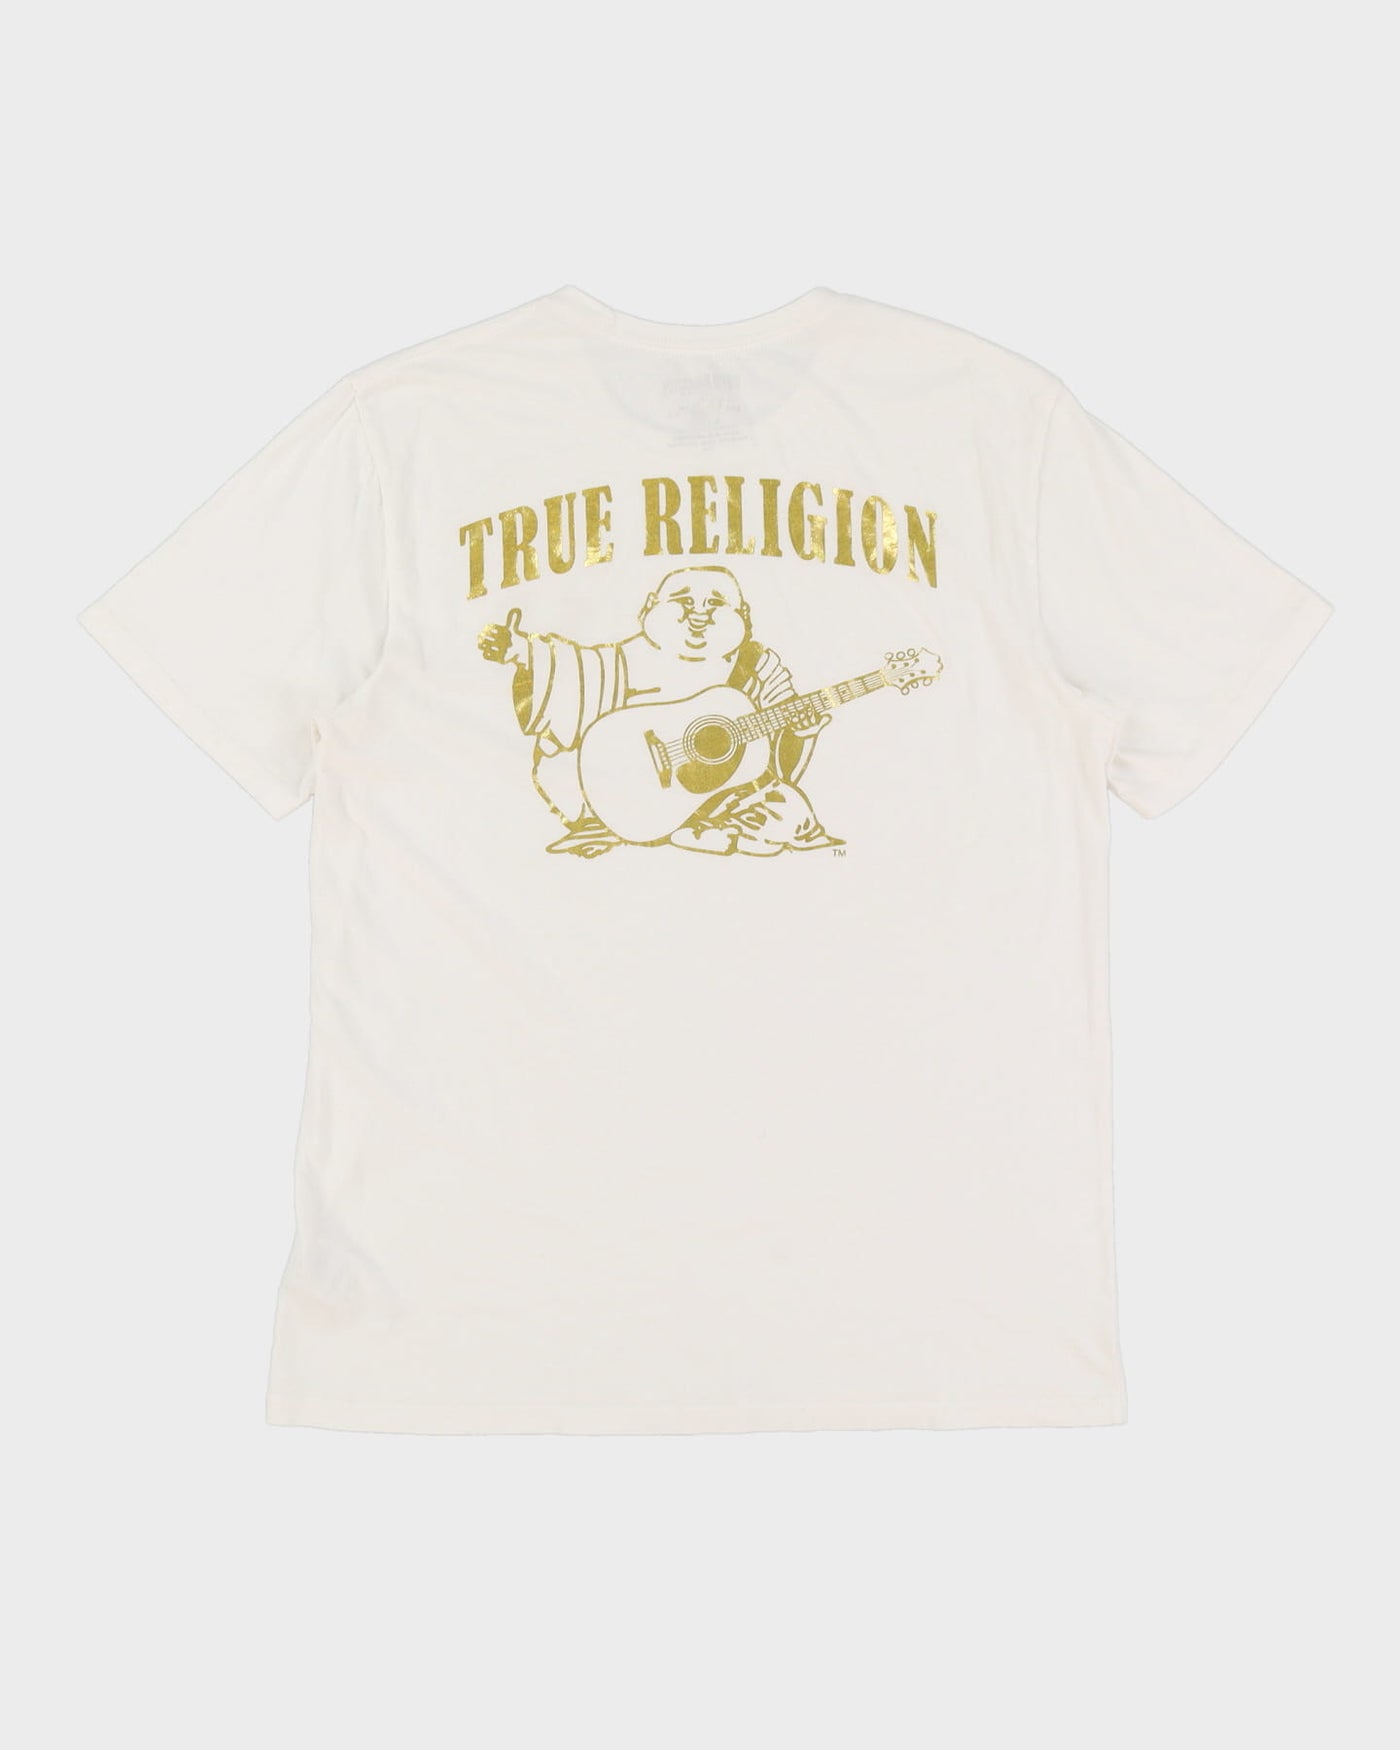 True Religion White / Gold Double Sided Print T-Shirt - L